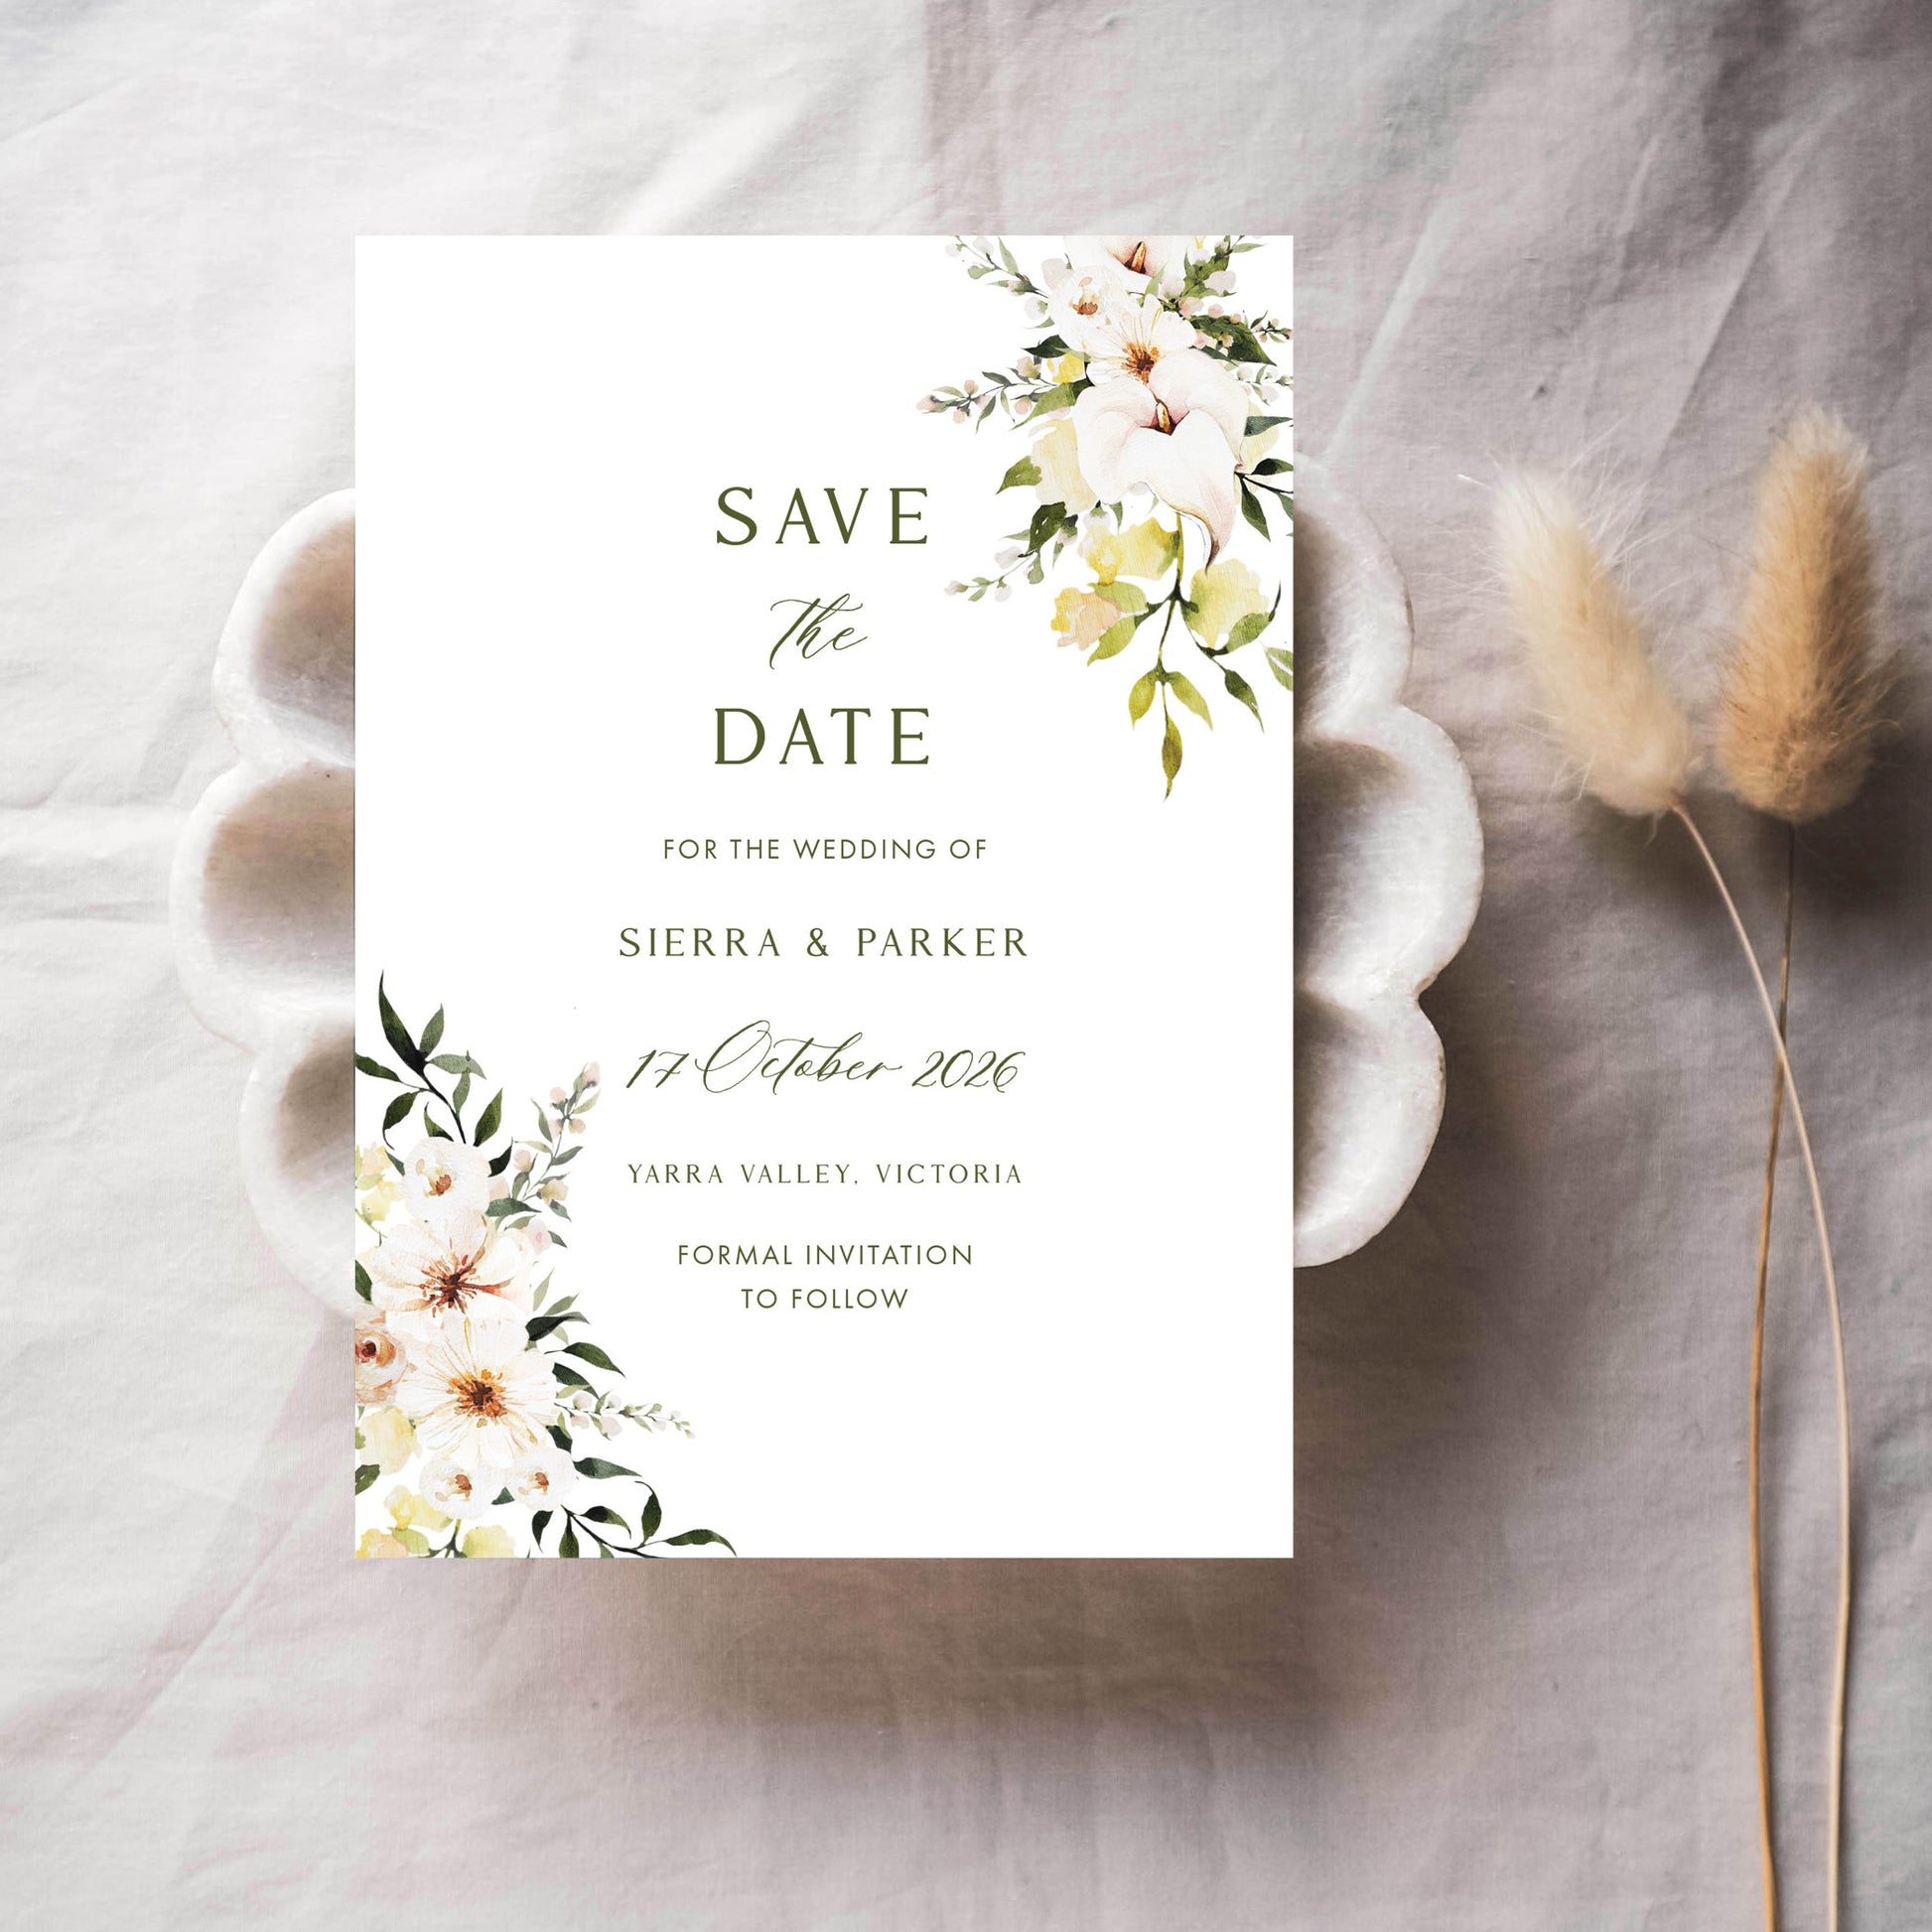 Modern Floral Save The Date Cards | Perth